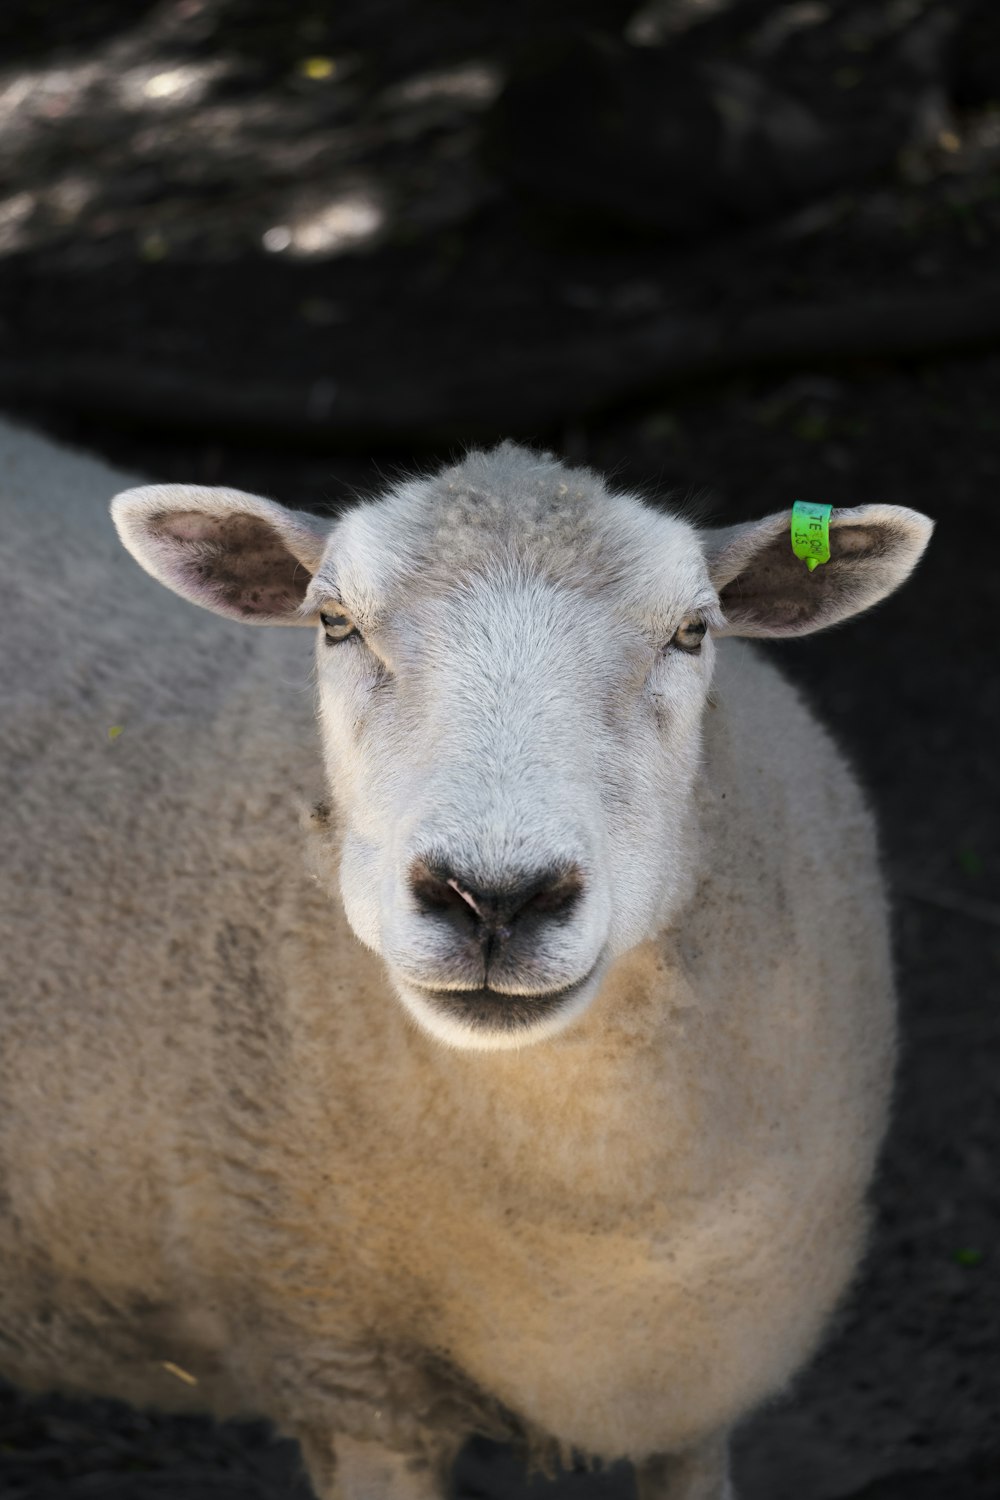 a close up of a sheep with a green tag on its ear